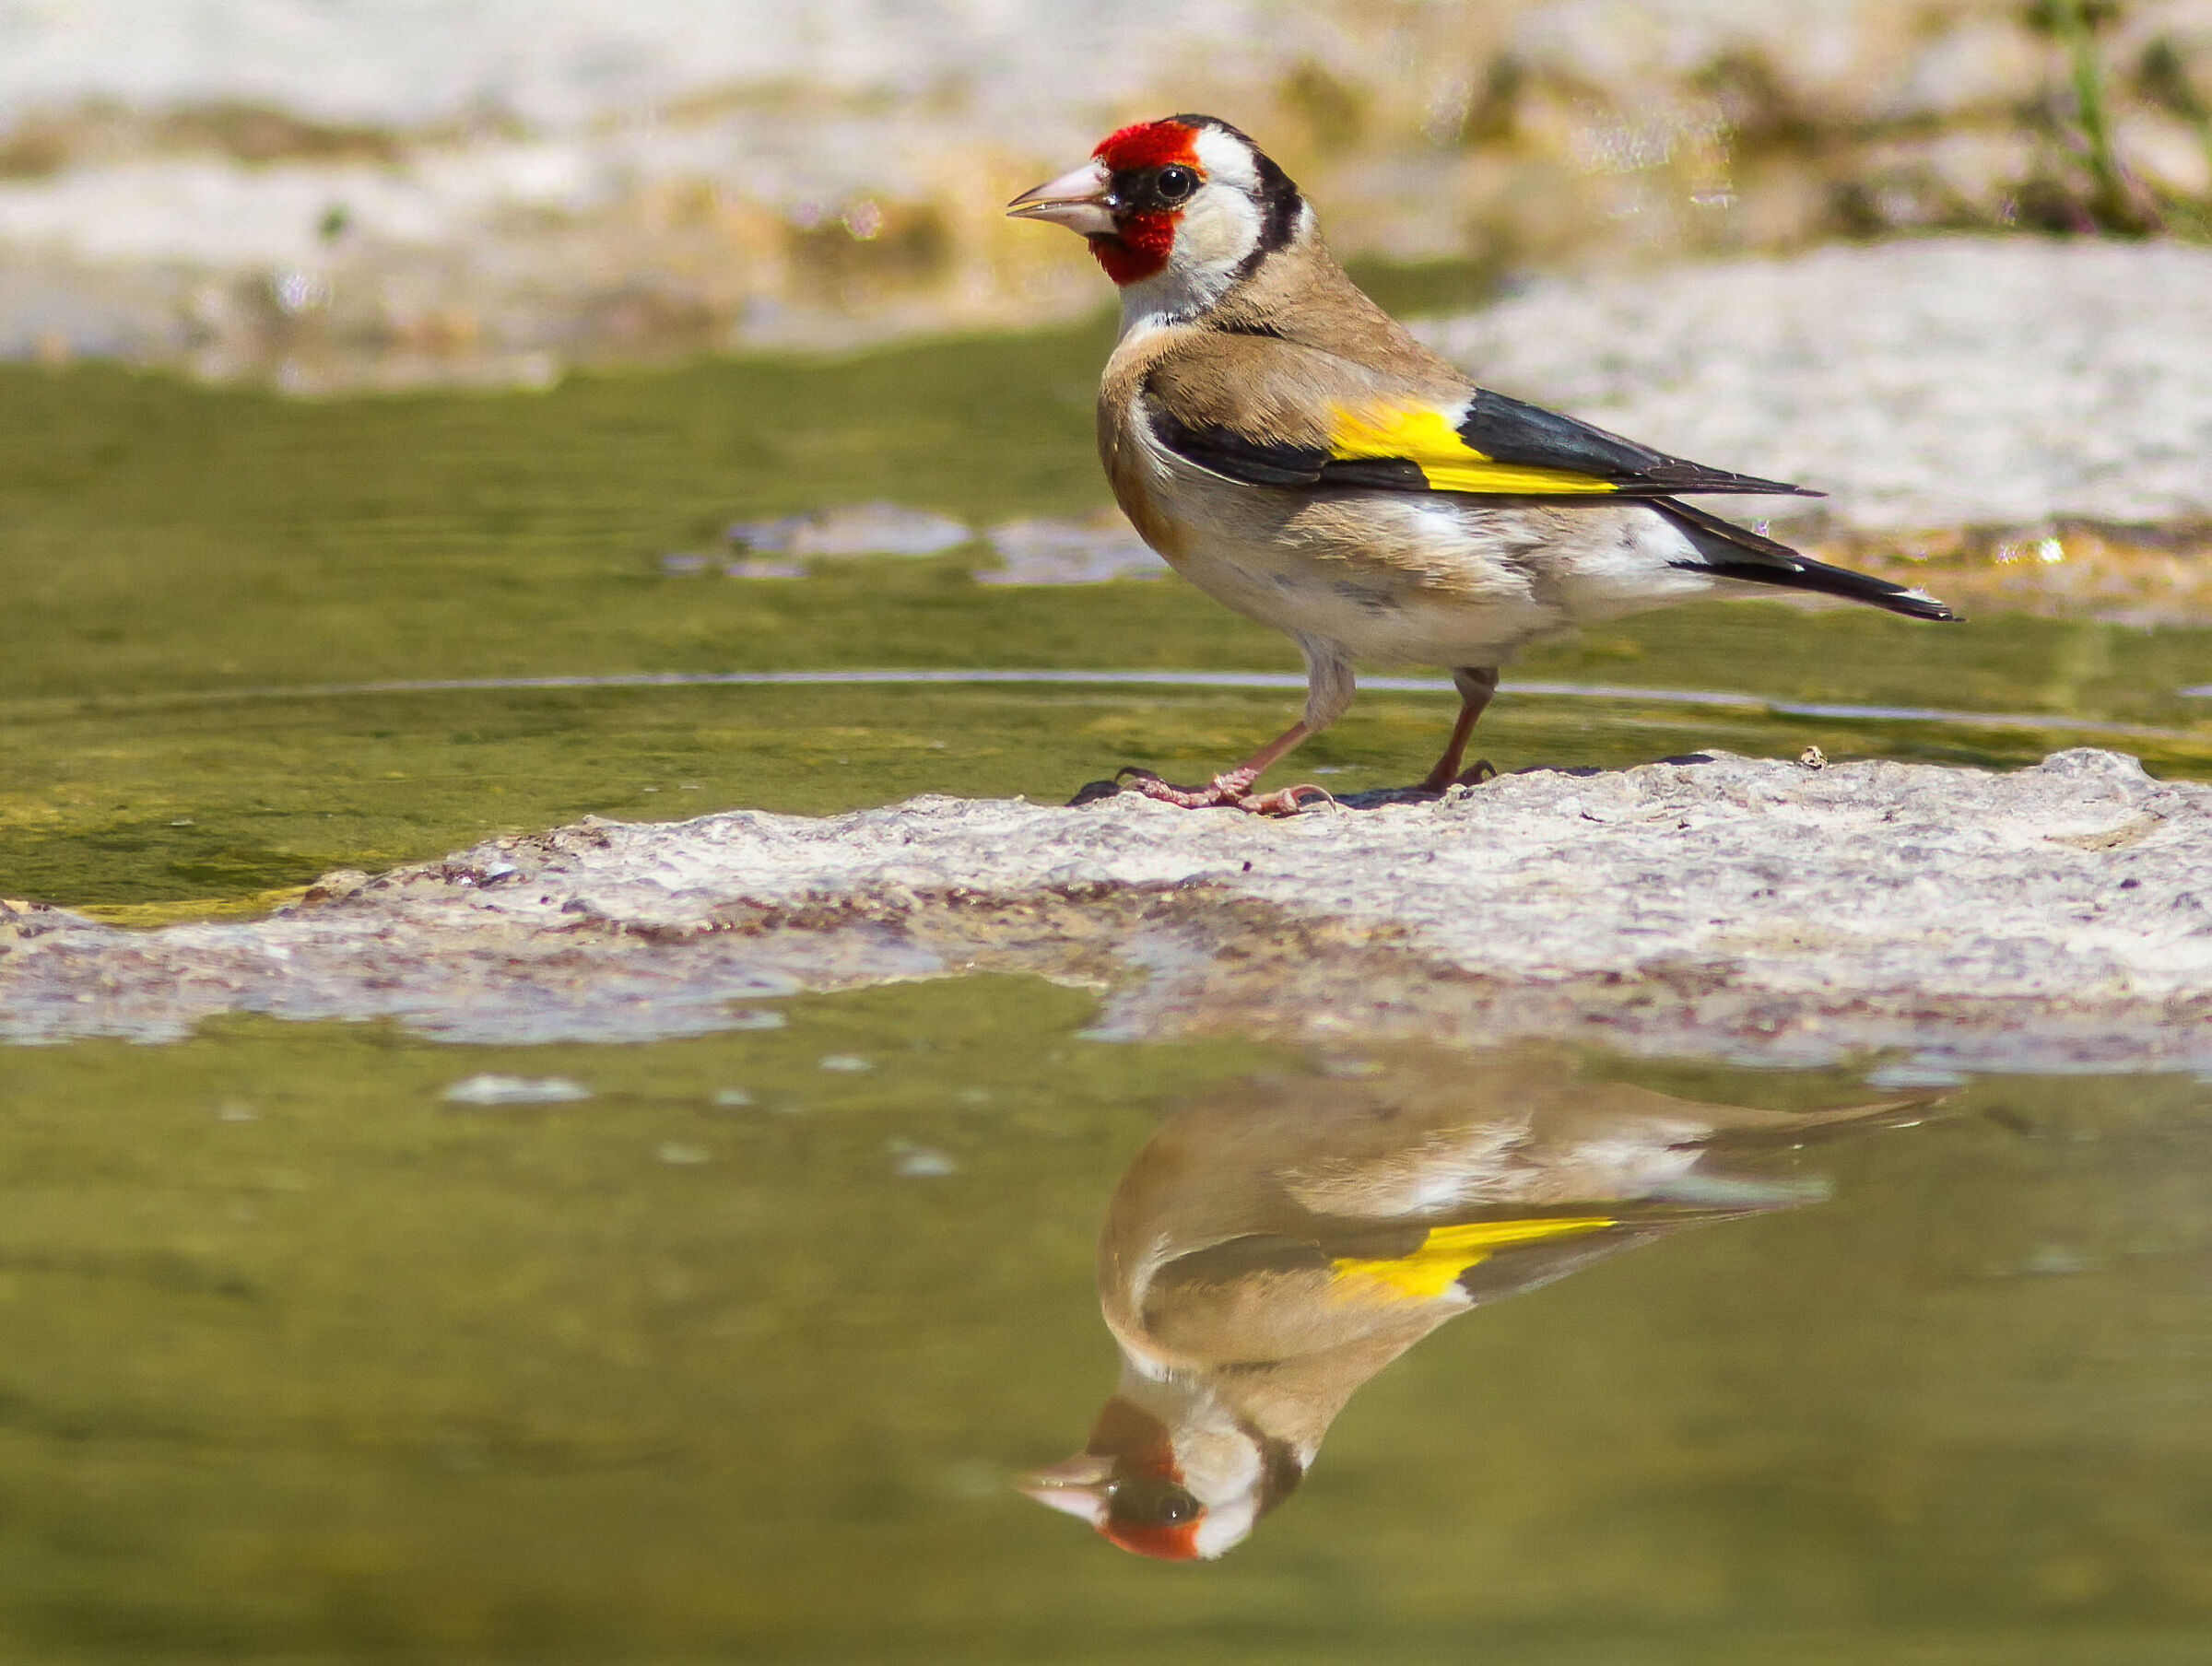 Other goldfinch...